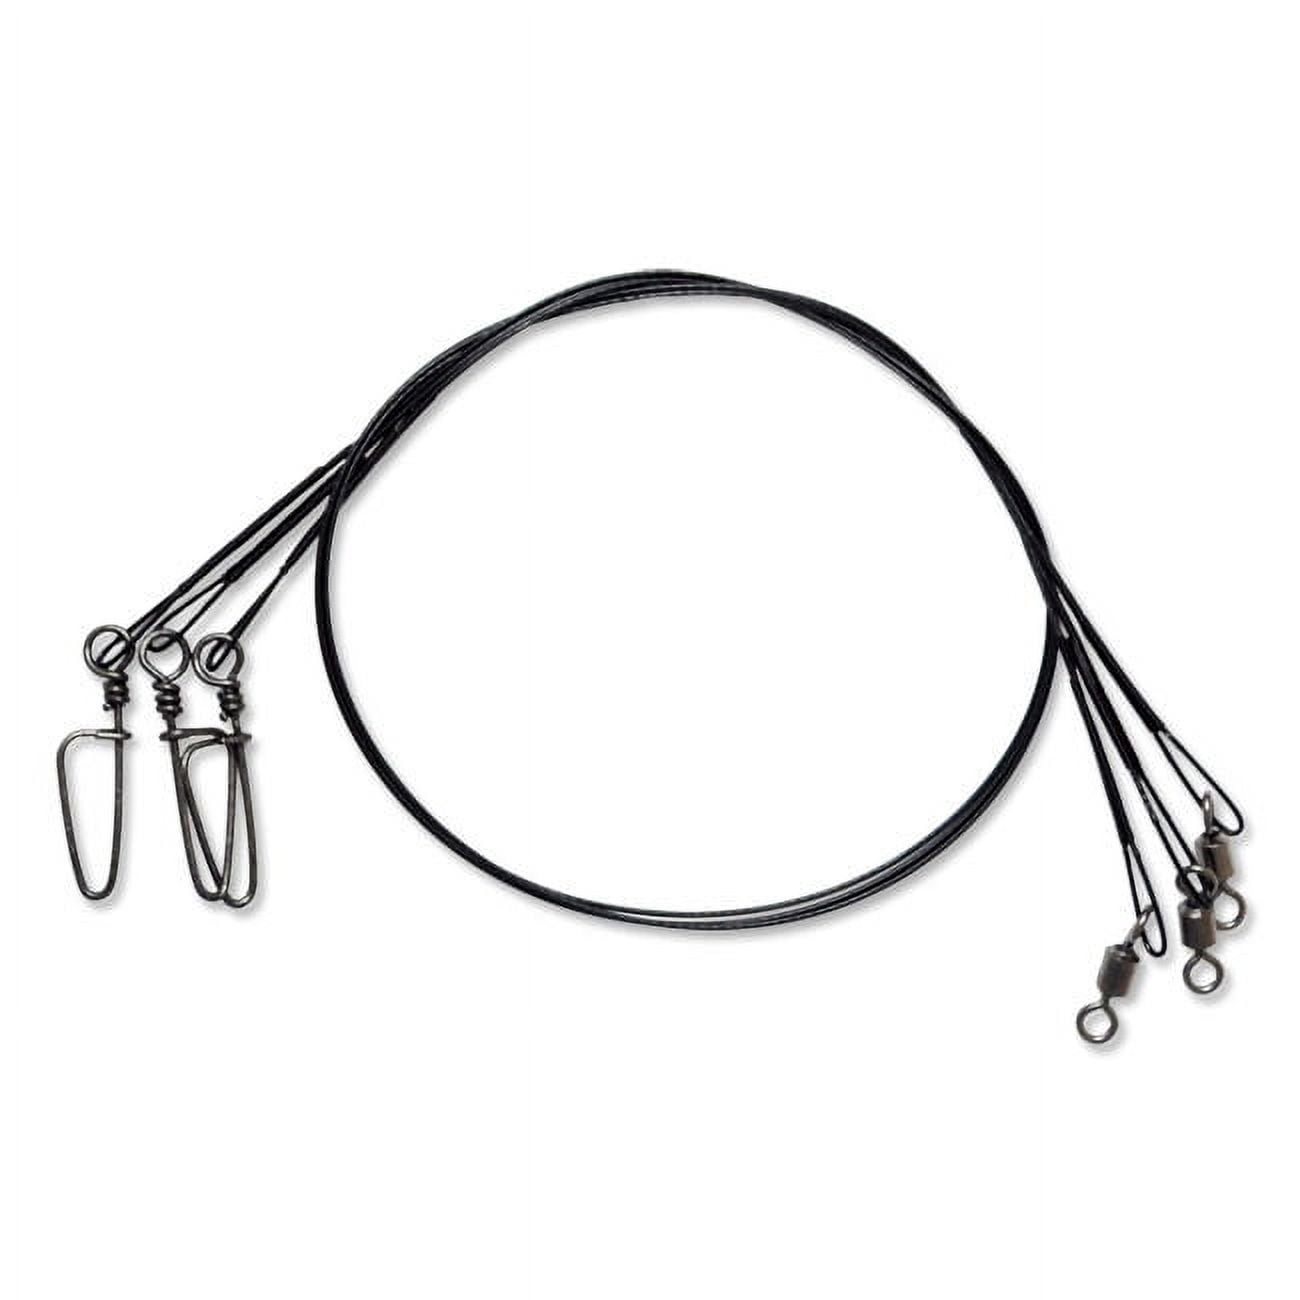  Tsunami Stainless Black Coated Steel Wire Leader, 10pk, 18,  30lb, TSWLB-30-18 : Sports & Outdoors